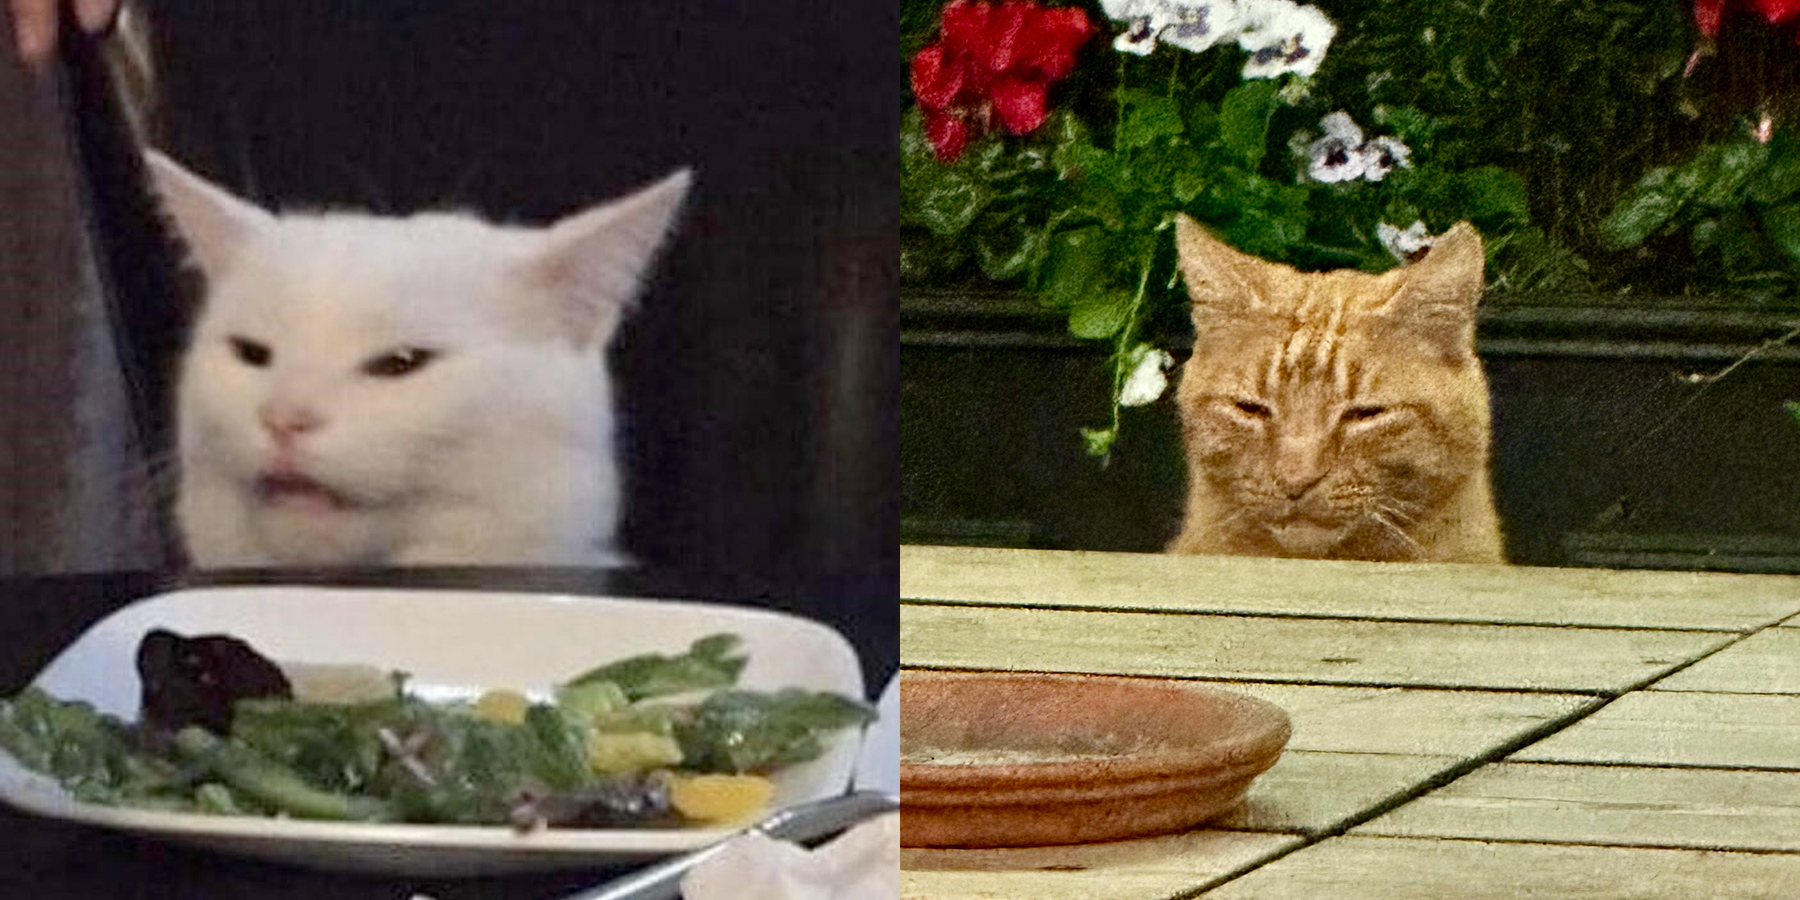 A comparison of the Smudge meme and a pub cat. Both are sat at a table looking unhappy with a plate in the foreground